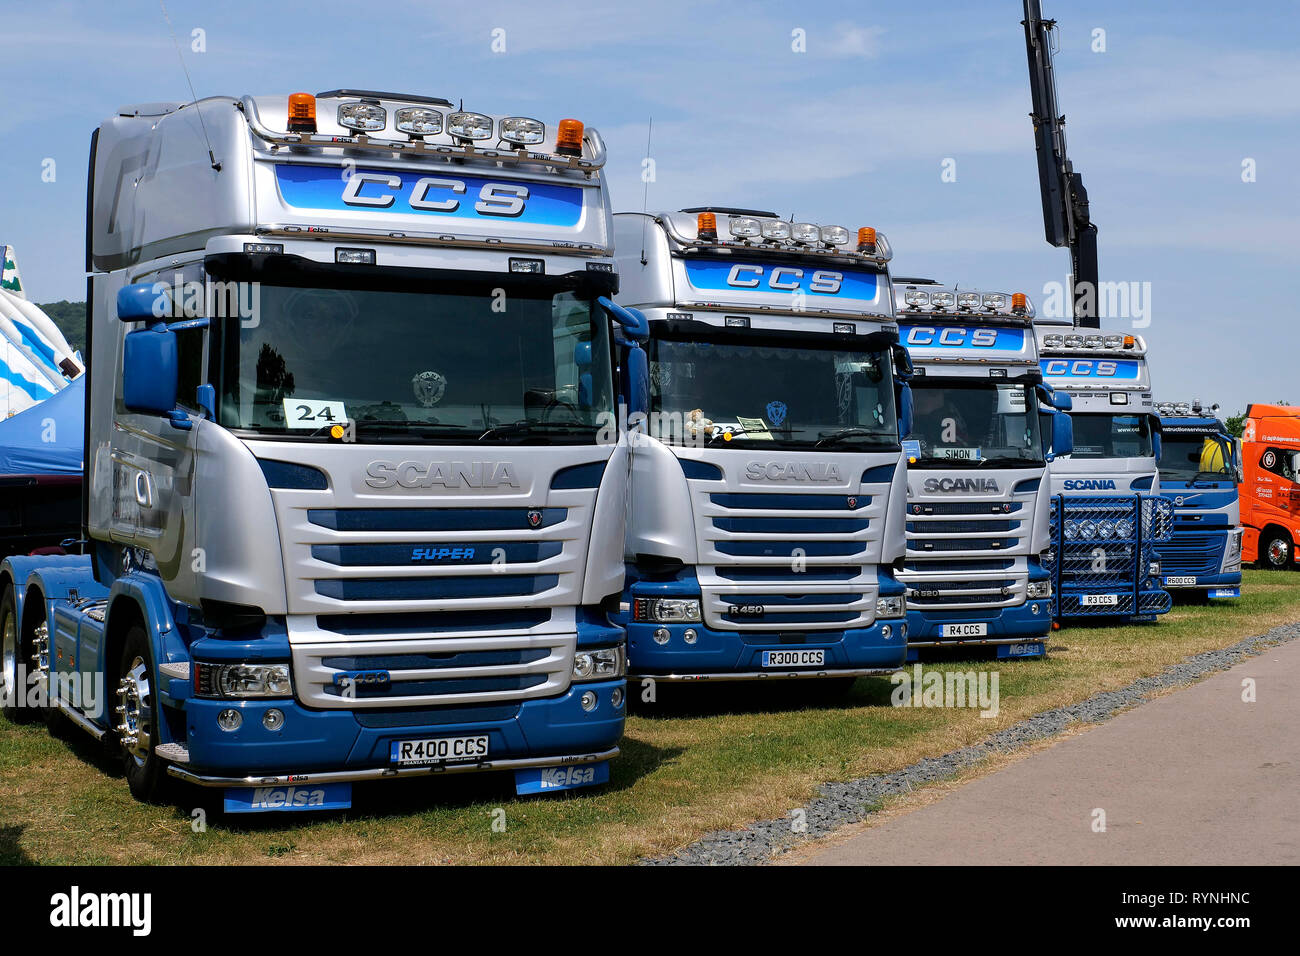 Truckfest South West 2018 truck show, at the Three Counties Showground, in Malvern, Worcestershire, England, UK. Stock Photo